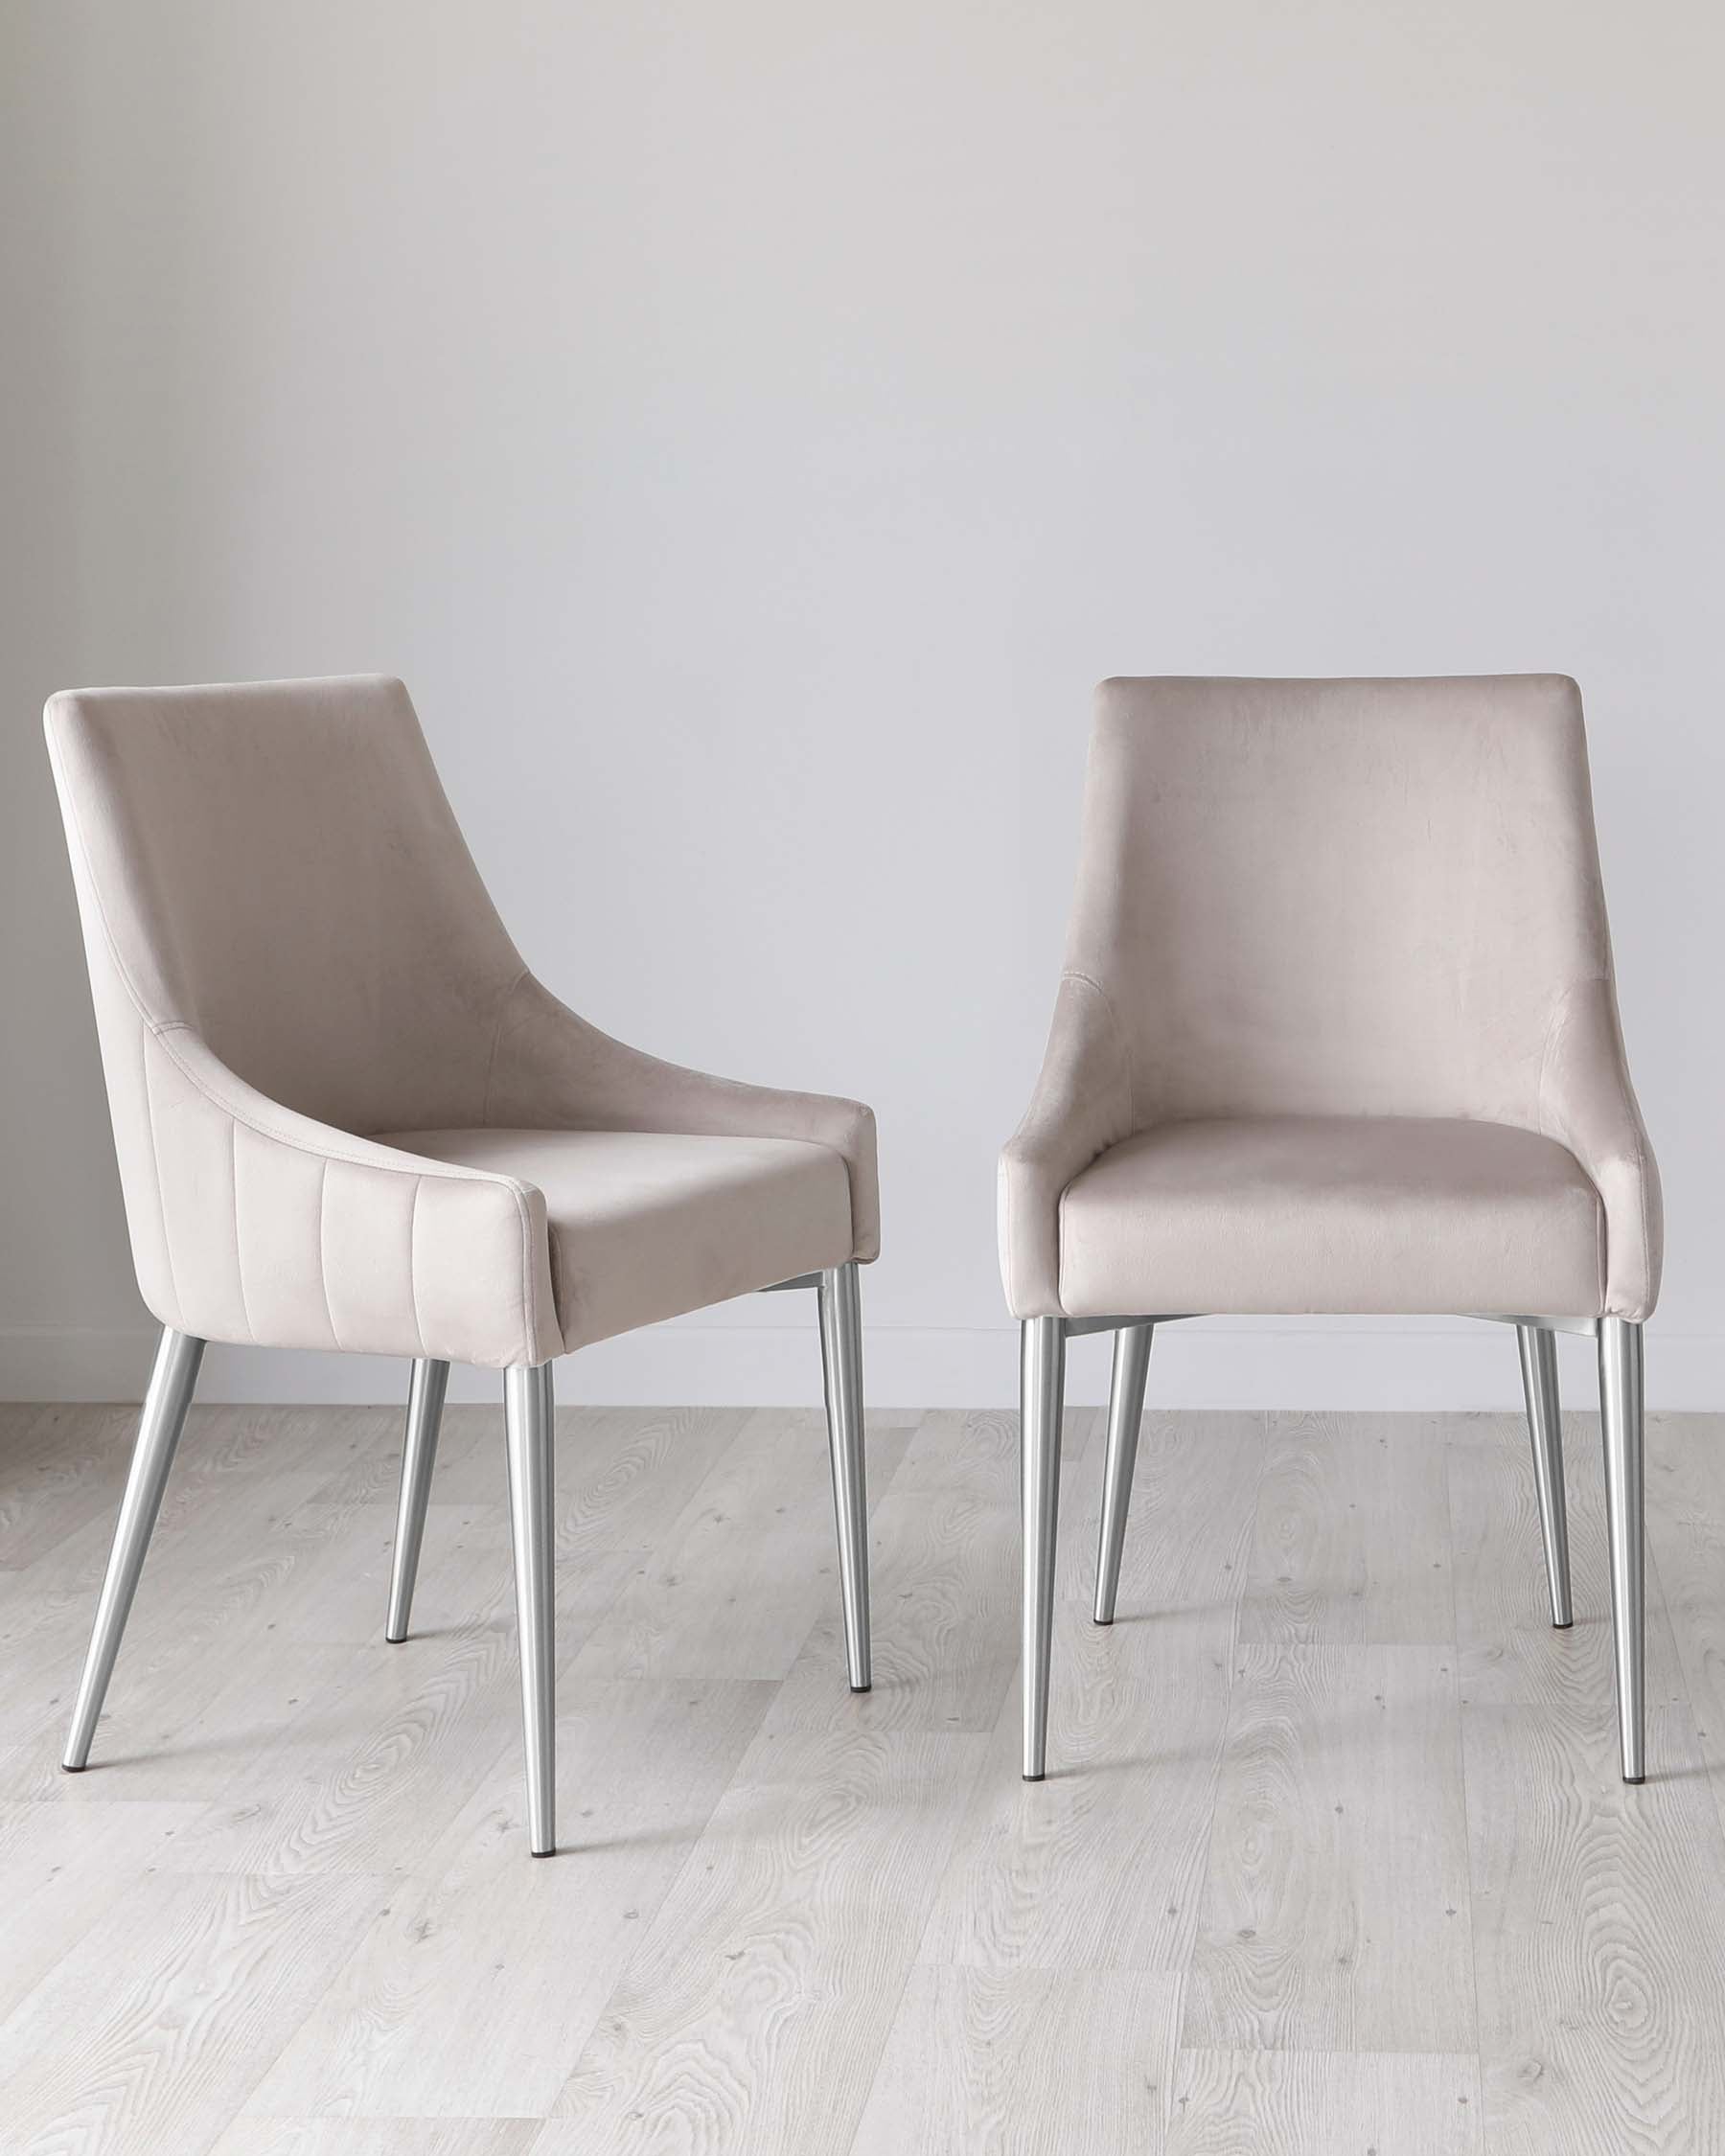 Juliana Champagne Velvet And Stainless Steel Dining Chair Danetti